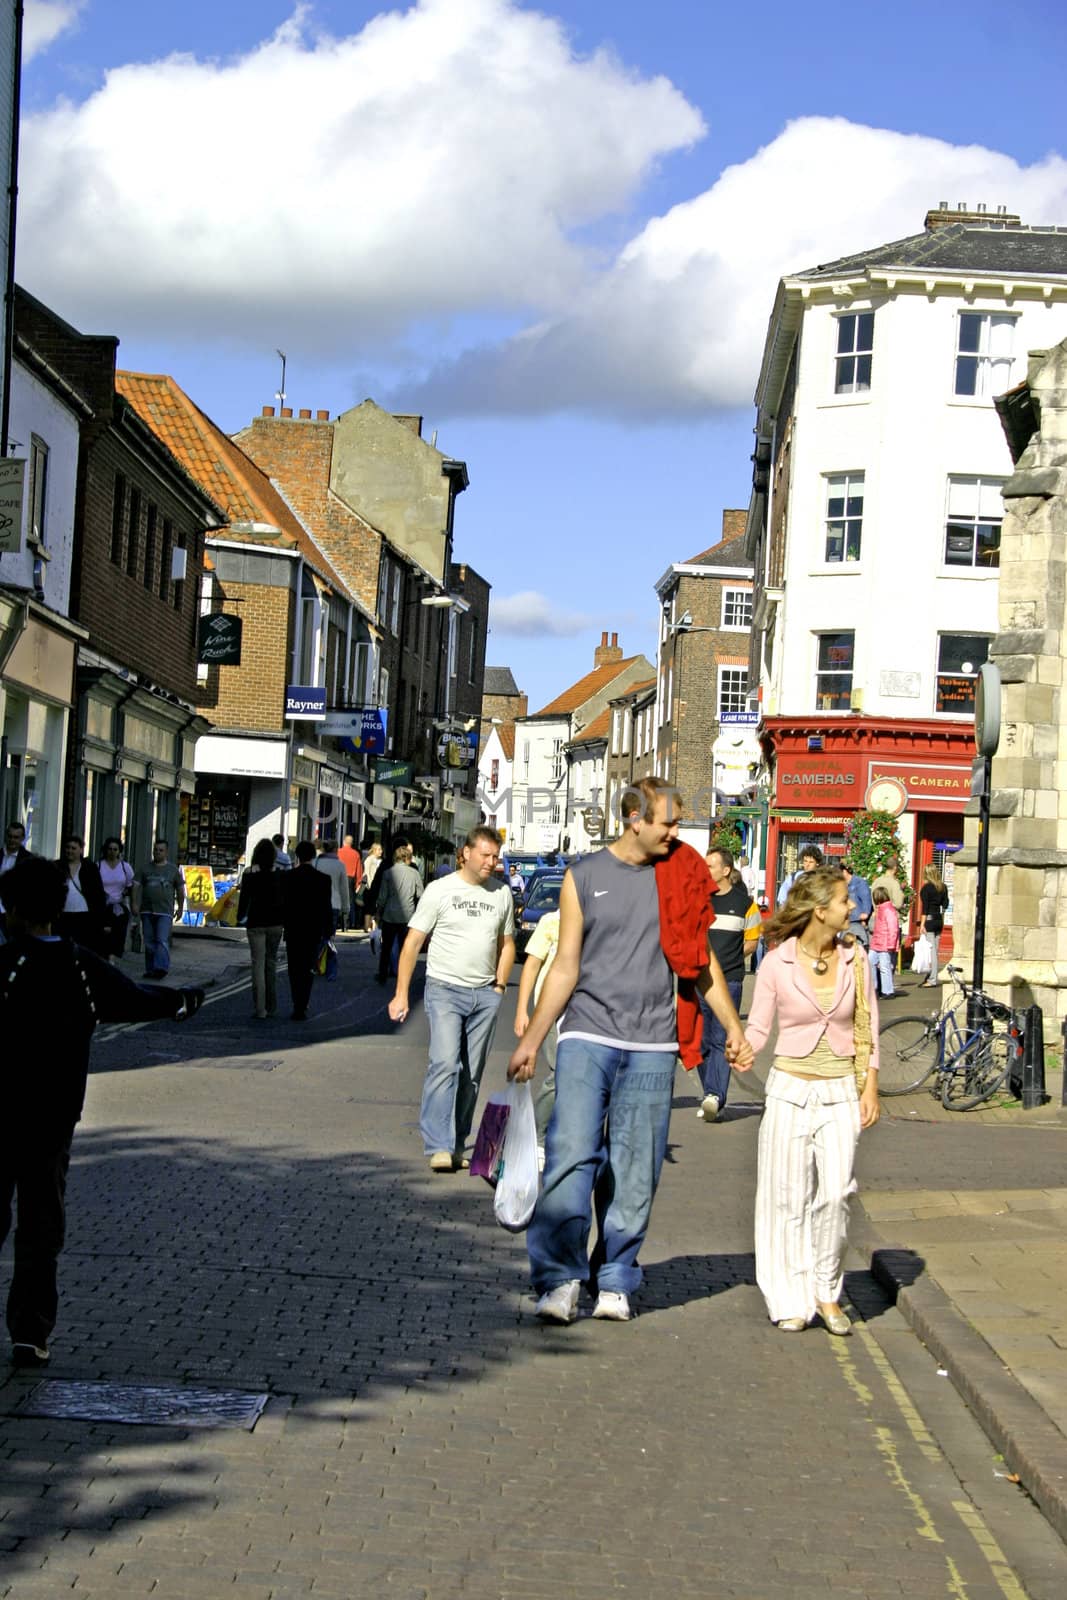 Shoppers and Tourists in York England